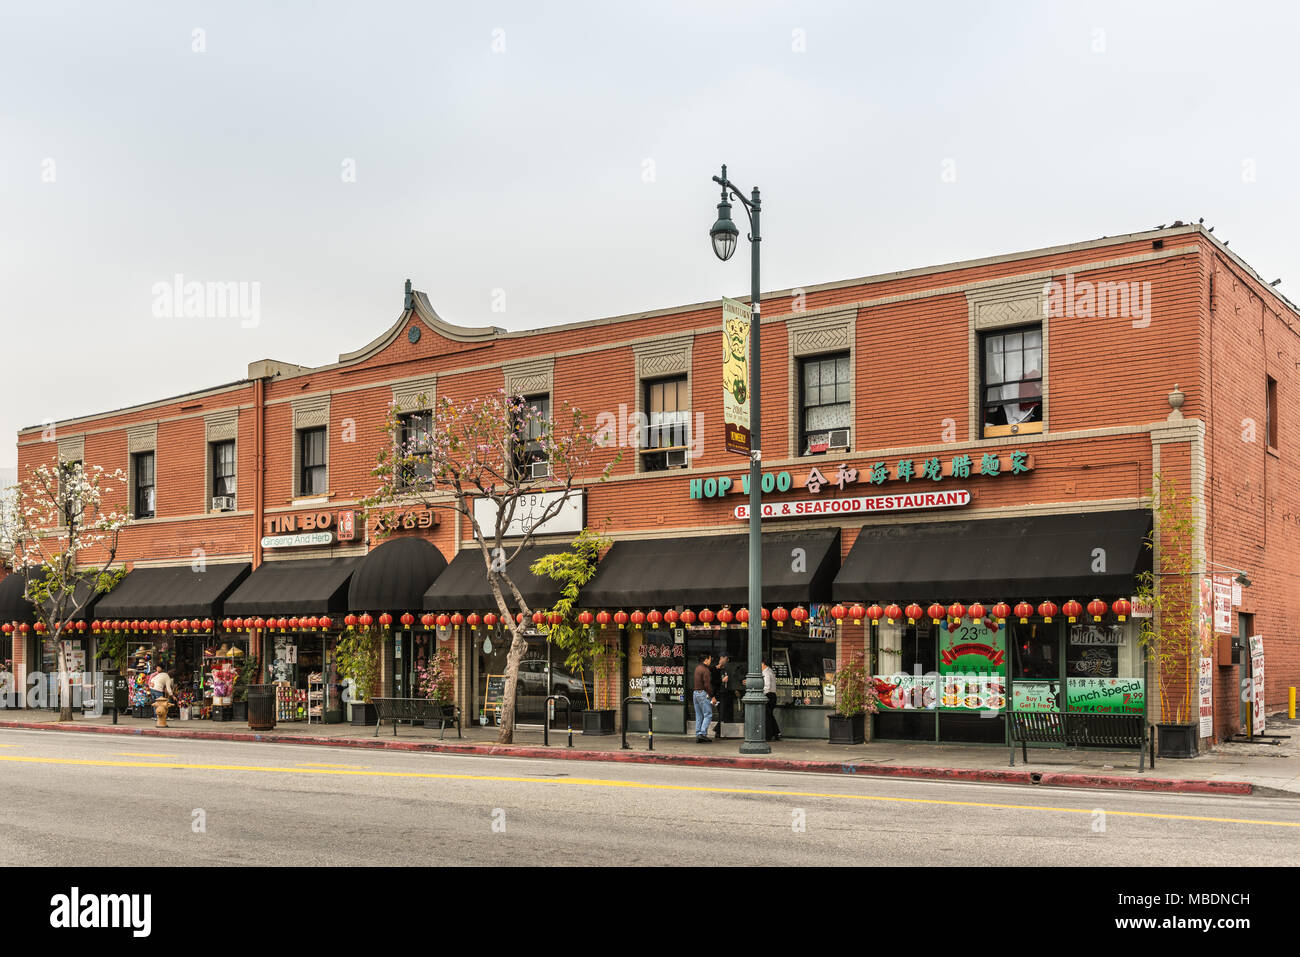 Los Angeles, CA, USA - April 5, 2018: Collection of stores and restaurants grouped in one block building of red bricks along Broadway in Chinatown und Stock Photo